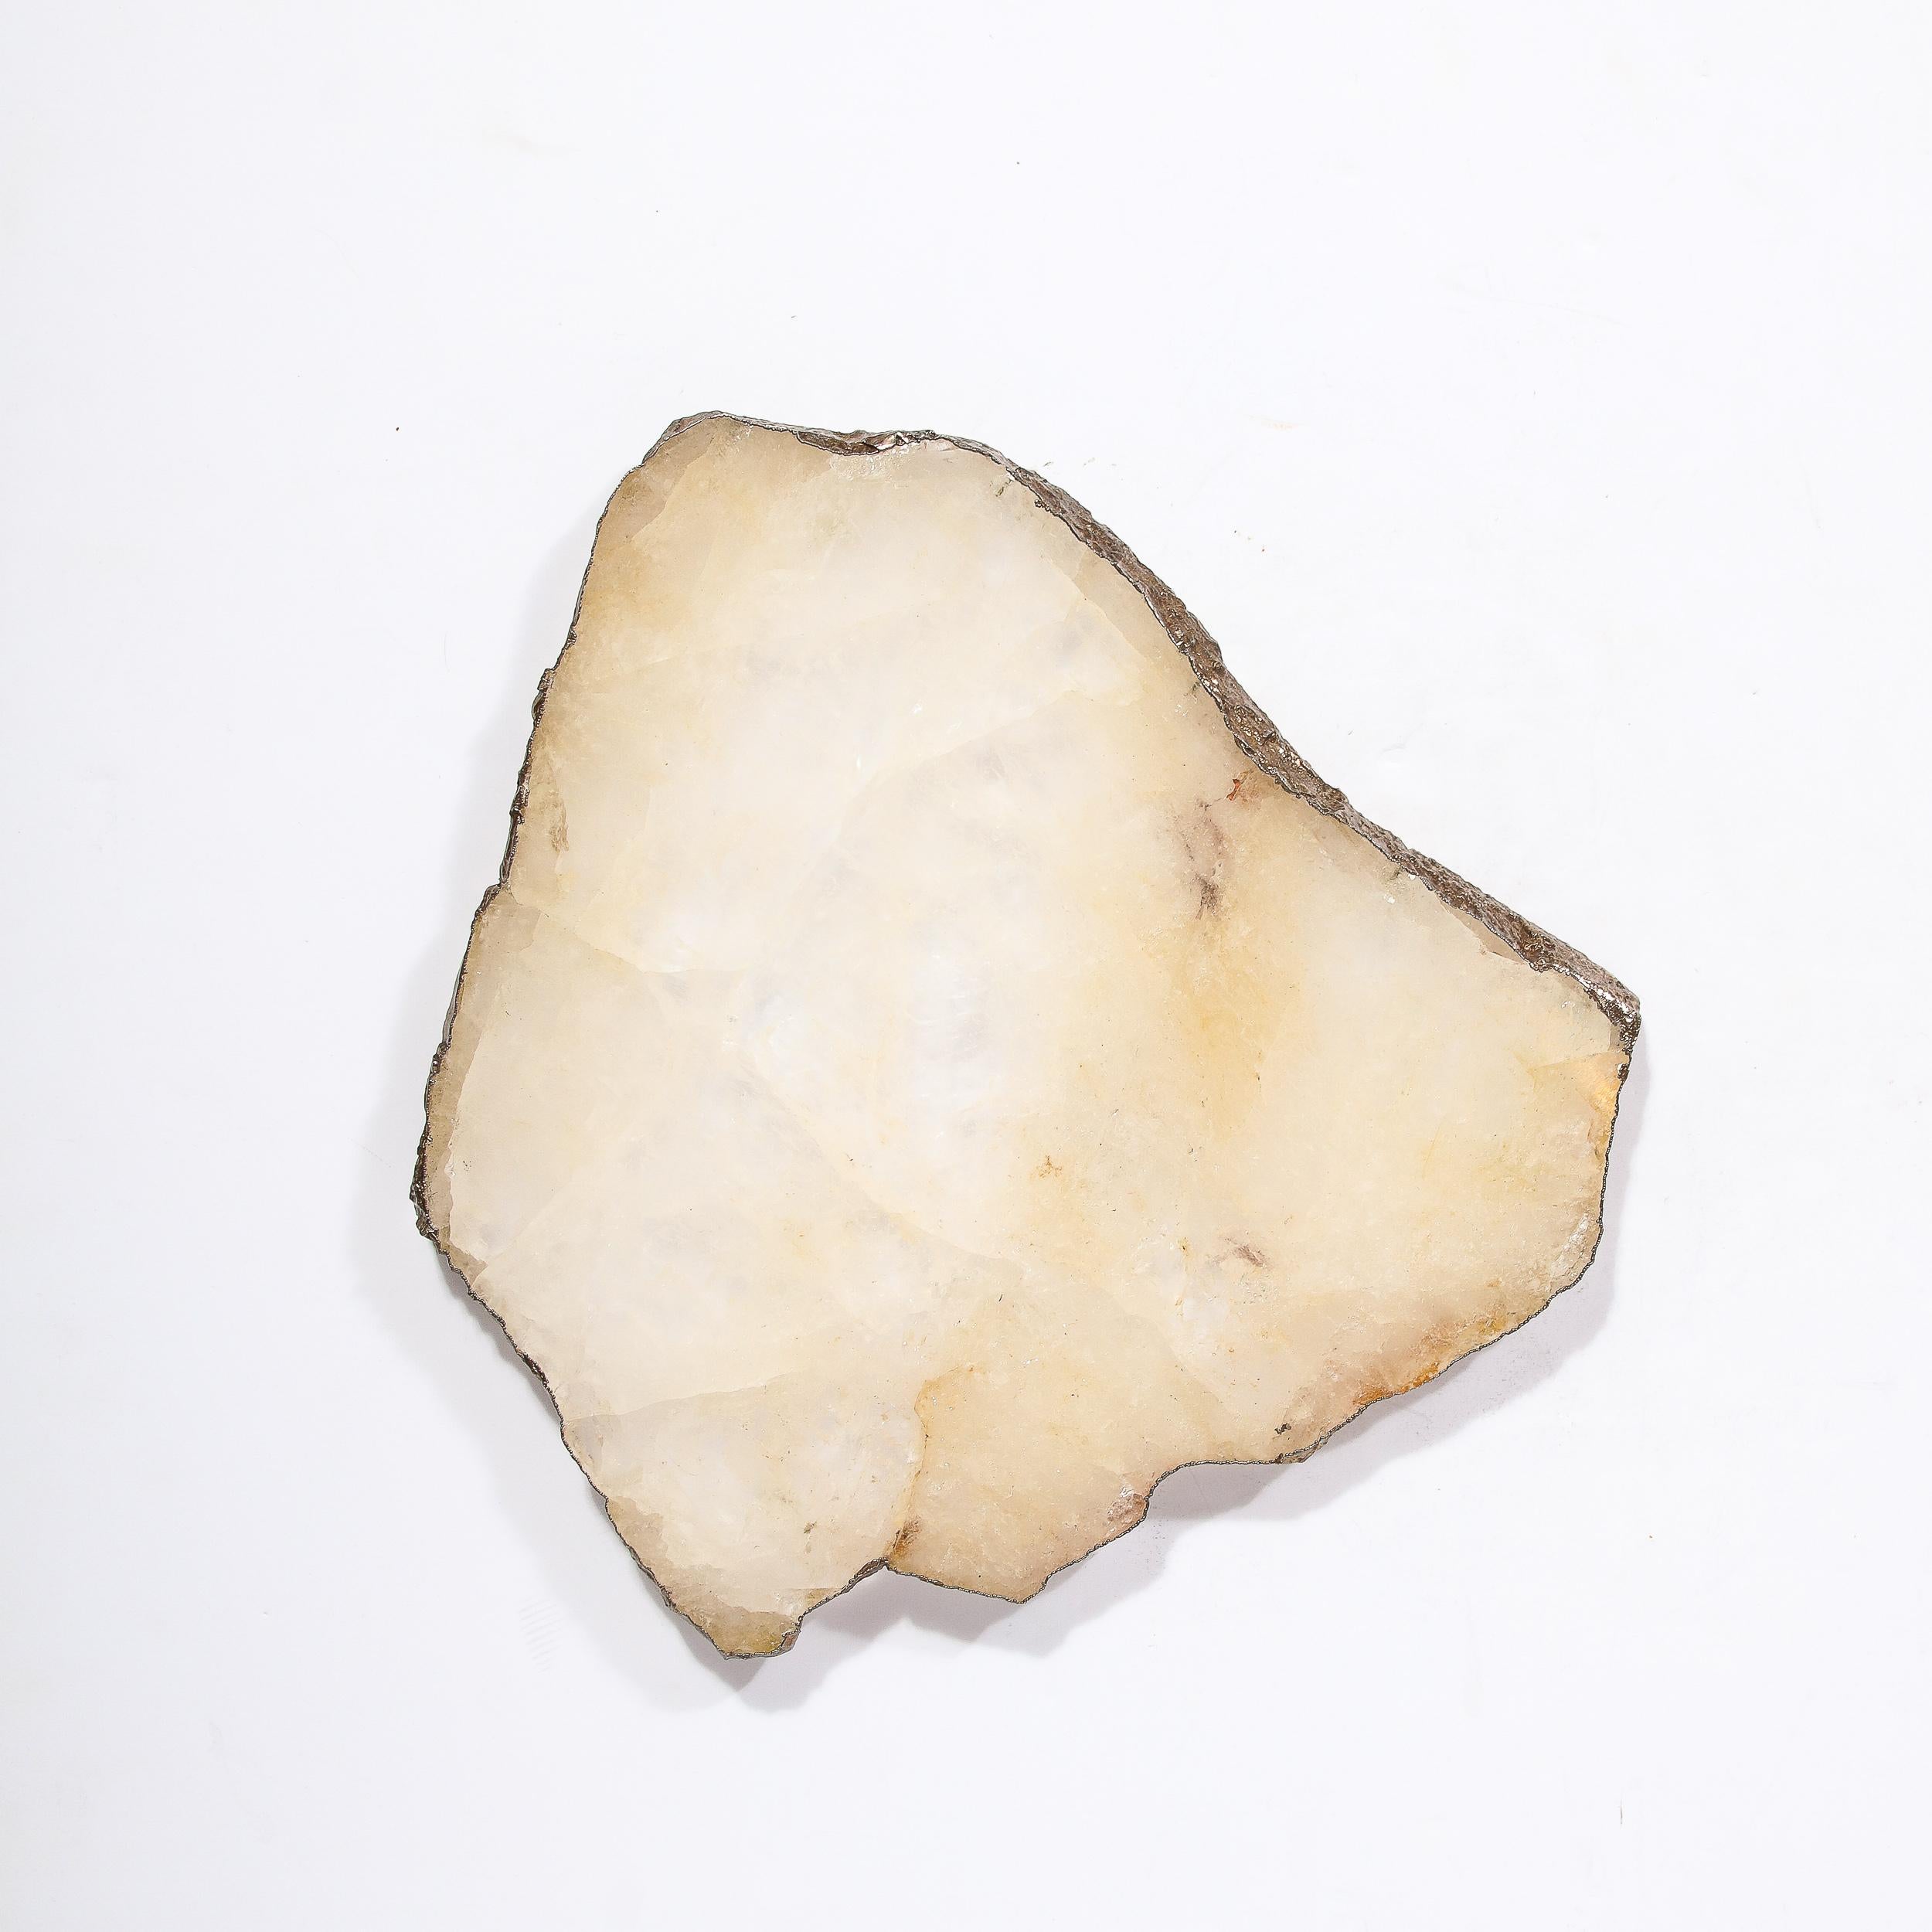 This elegant modernist tray features a beautiful slab of crystal quartz geode in a warm honeyed off white hue- exhibiting the natural beauty of the stone- full of tonal variation and rich veining. This natural material- a work of art in its own